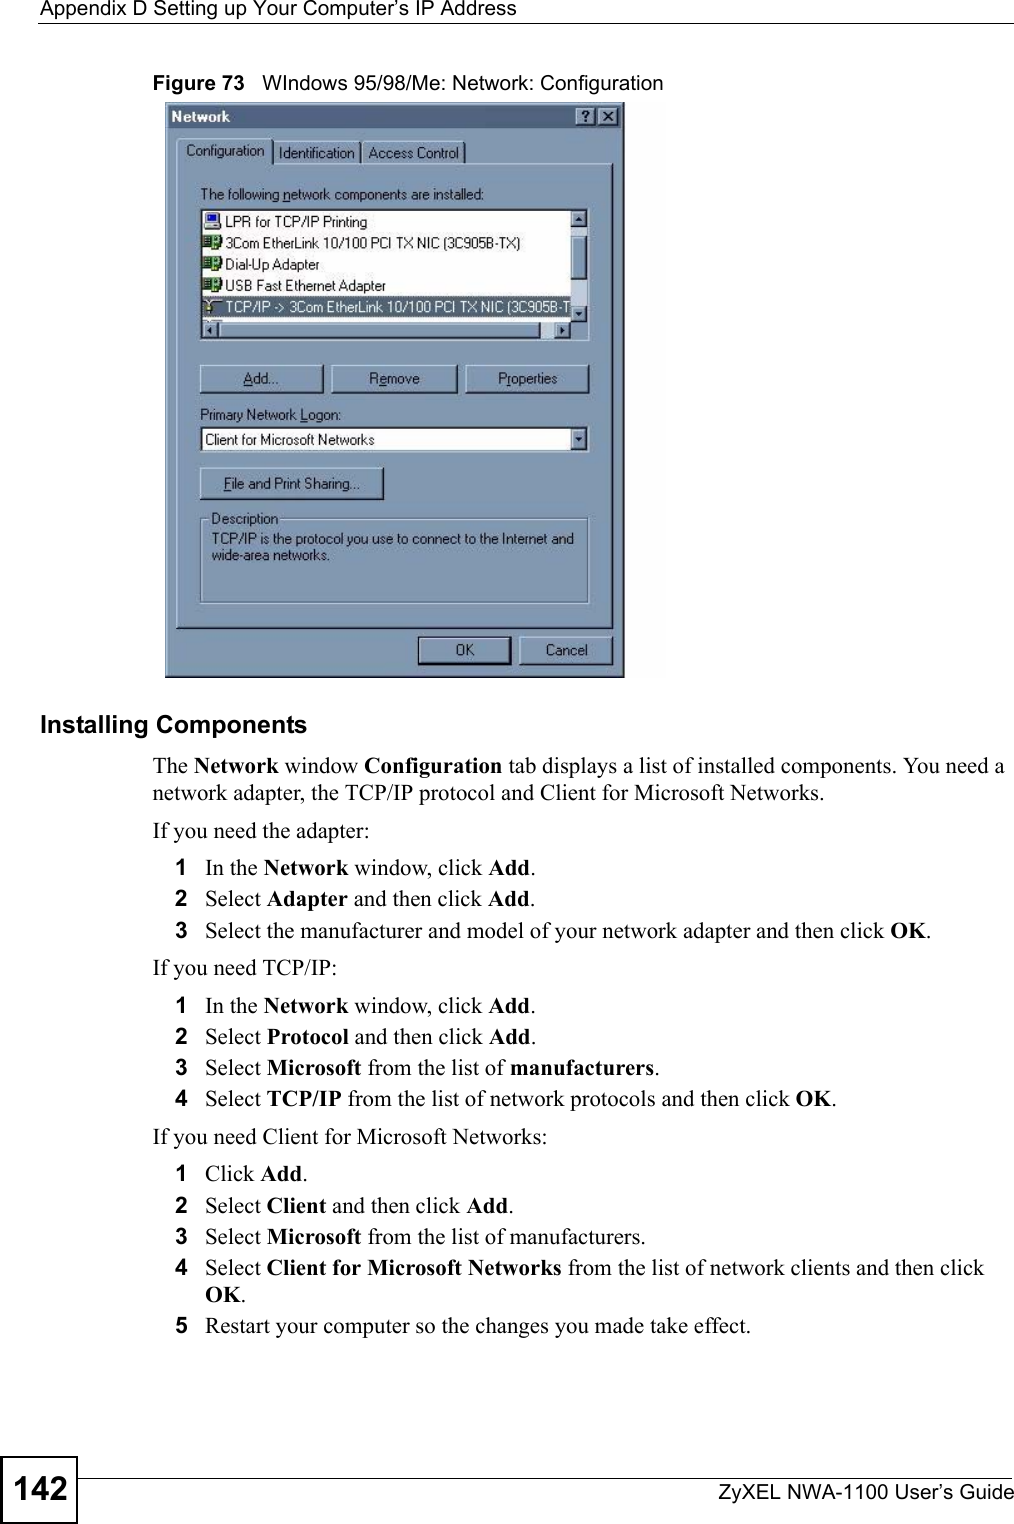 Appendix D Setting up Your Computer’s IP AddressZyXEL NWA-1100 User’s Guide142Figure 73   WIndows 95/98/Me: Network: ConfigurationInstalling ComponentsThe Network window Configuration tab displays a list of installed components. You need a network adapter, the TCP/IP protocol and Client for Microsoft Networks.If you need the adapter:1In the Network window, click Add.2Select Adapter and then click Add.3Select the manufacturer and model of your network adapter and then click OK.If you need TCP/IP:1In the Network window, click Add.2Select Protocol and then click Add.3Select Microsoft from the list of manufacturers.4Select TCP/IP from the list of network protocols and then click OK.If you need Client for Microsoft Networks:1Click Add.2Select Client and then click Add.3Select Microsoft from the list of manufacturers.4Select Client for Microsoft Networks from the list of network clients and then click OK.5Restart your computer so the changes you made take effect.